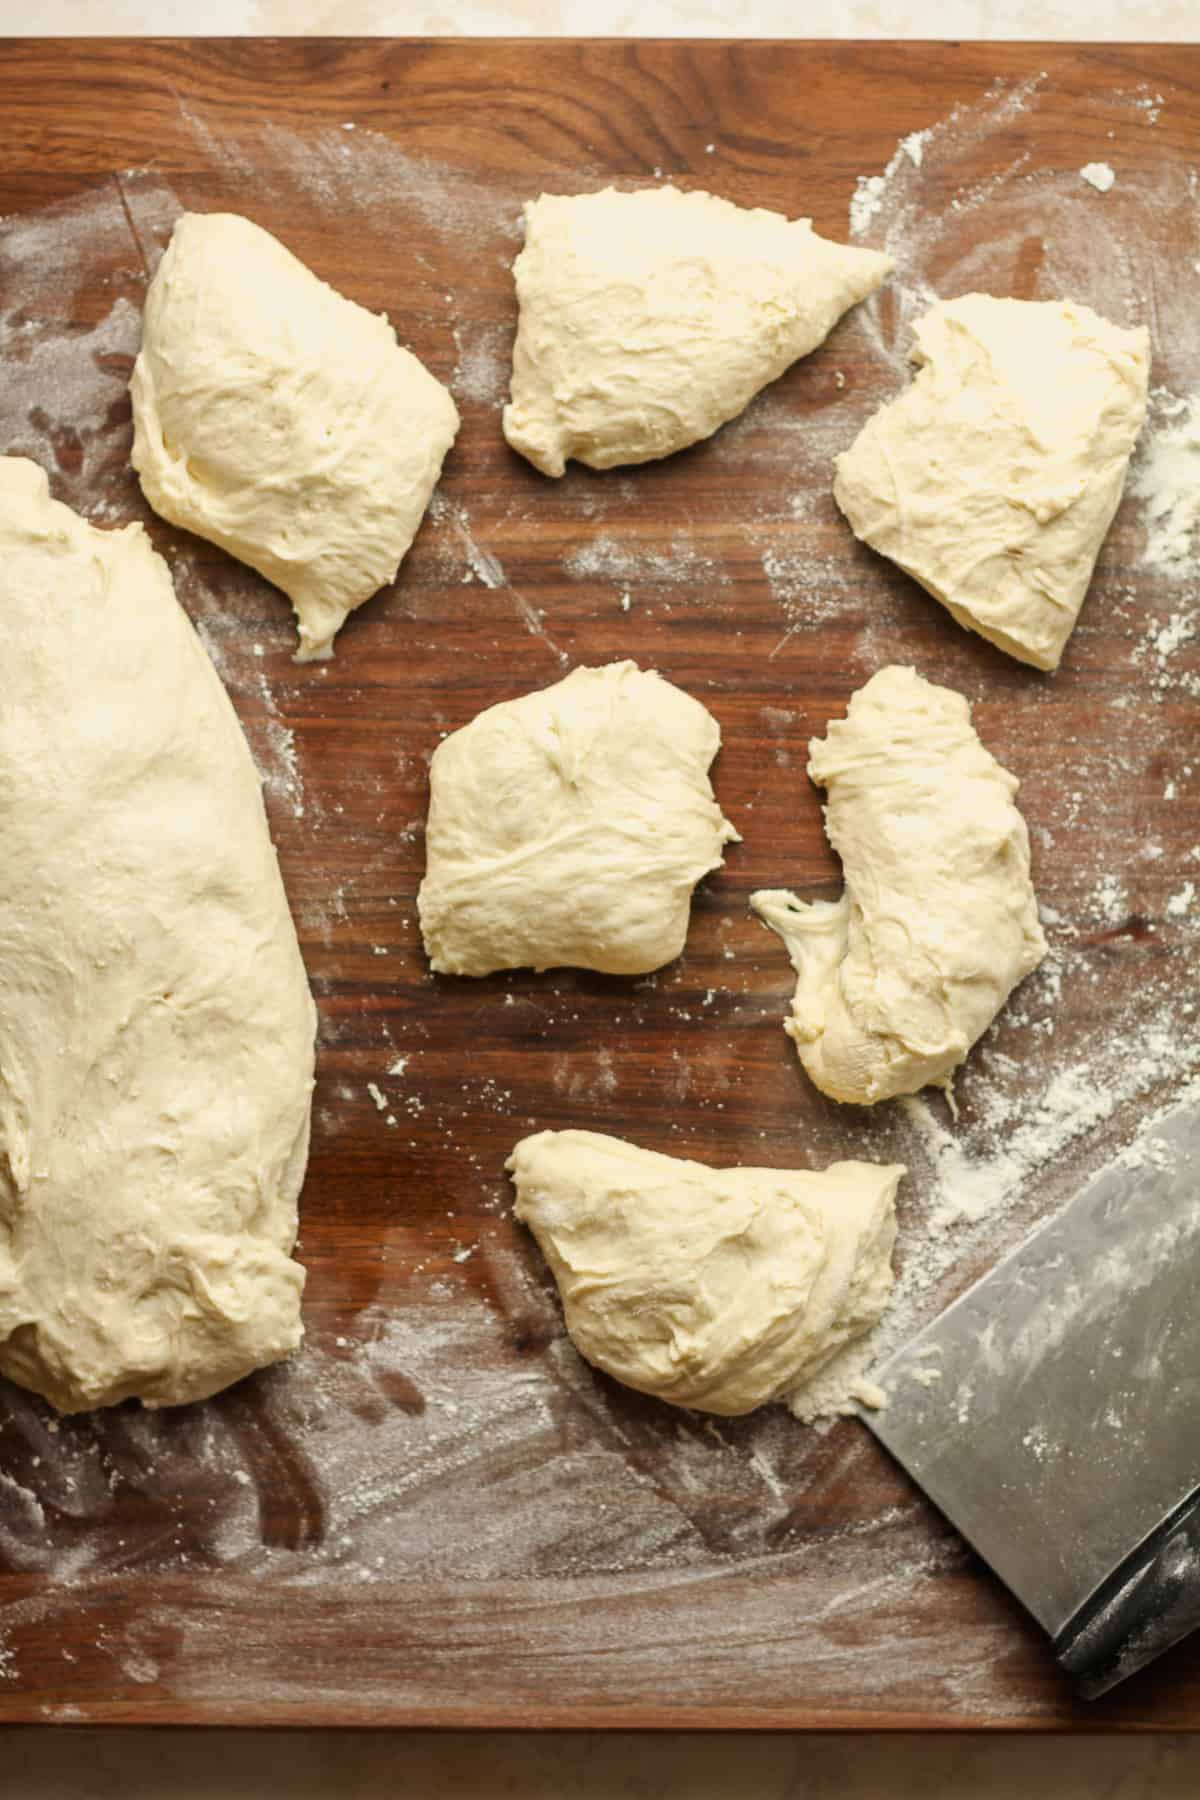 Several pieces of the naan ready to be rolled.